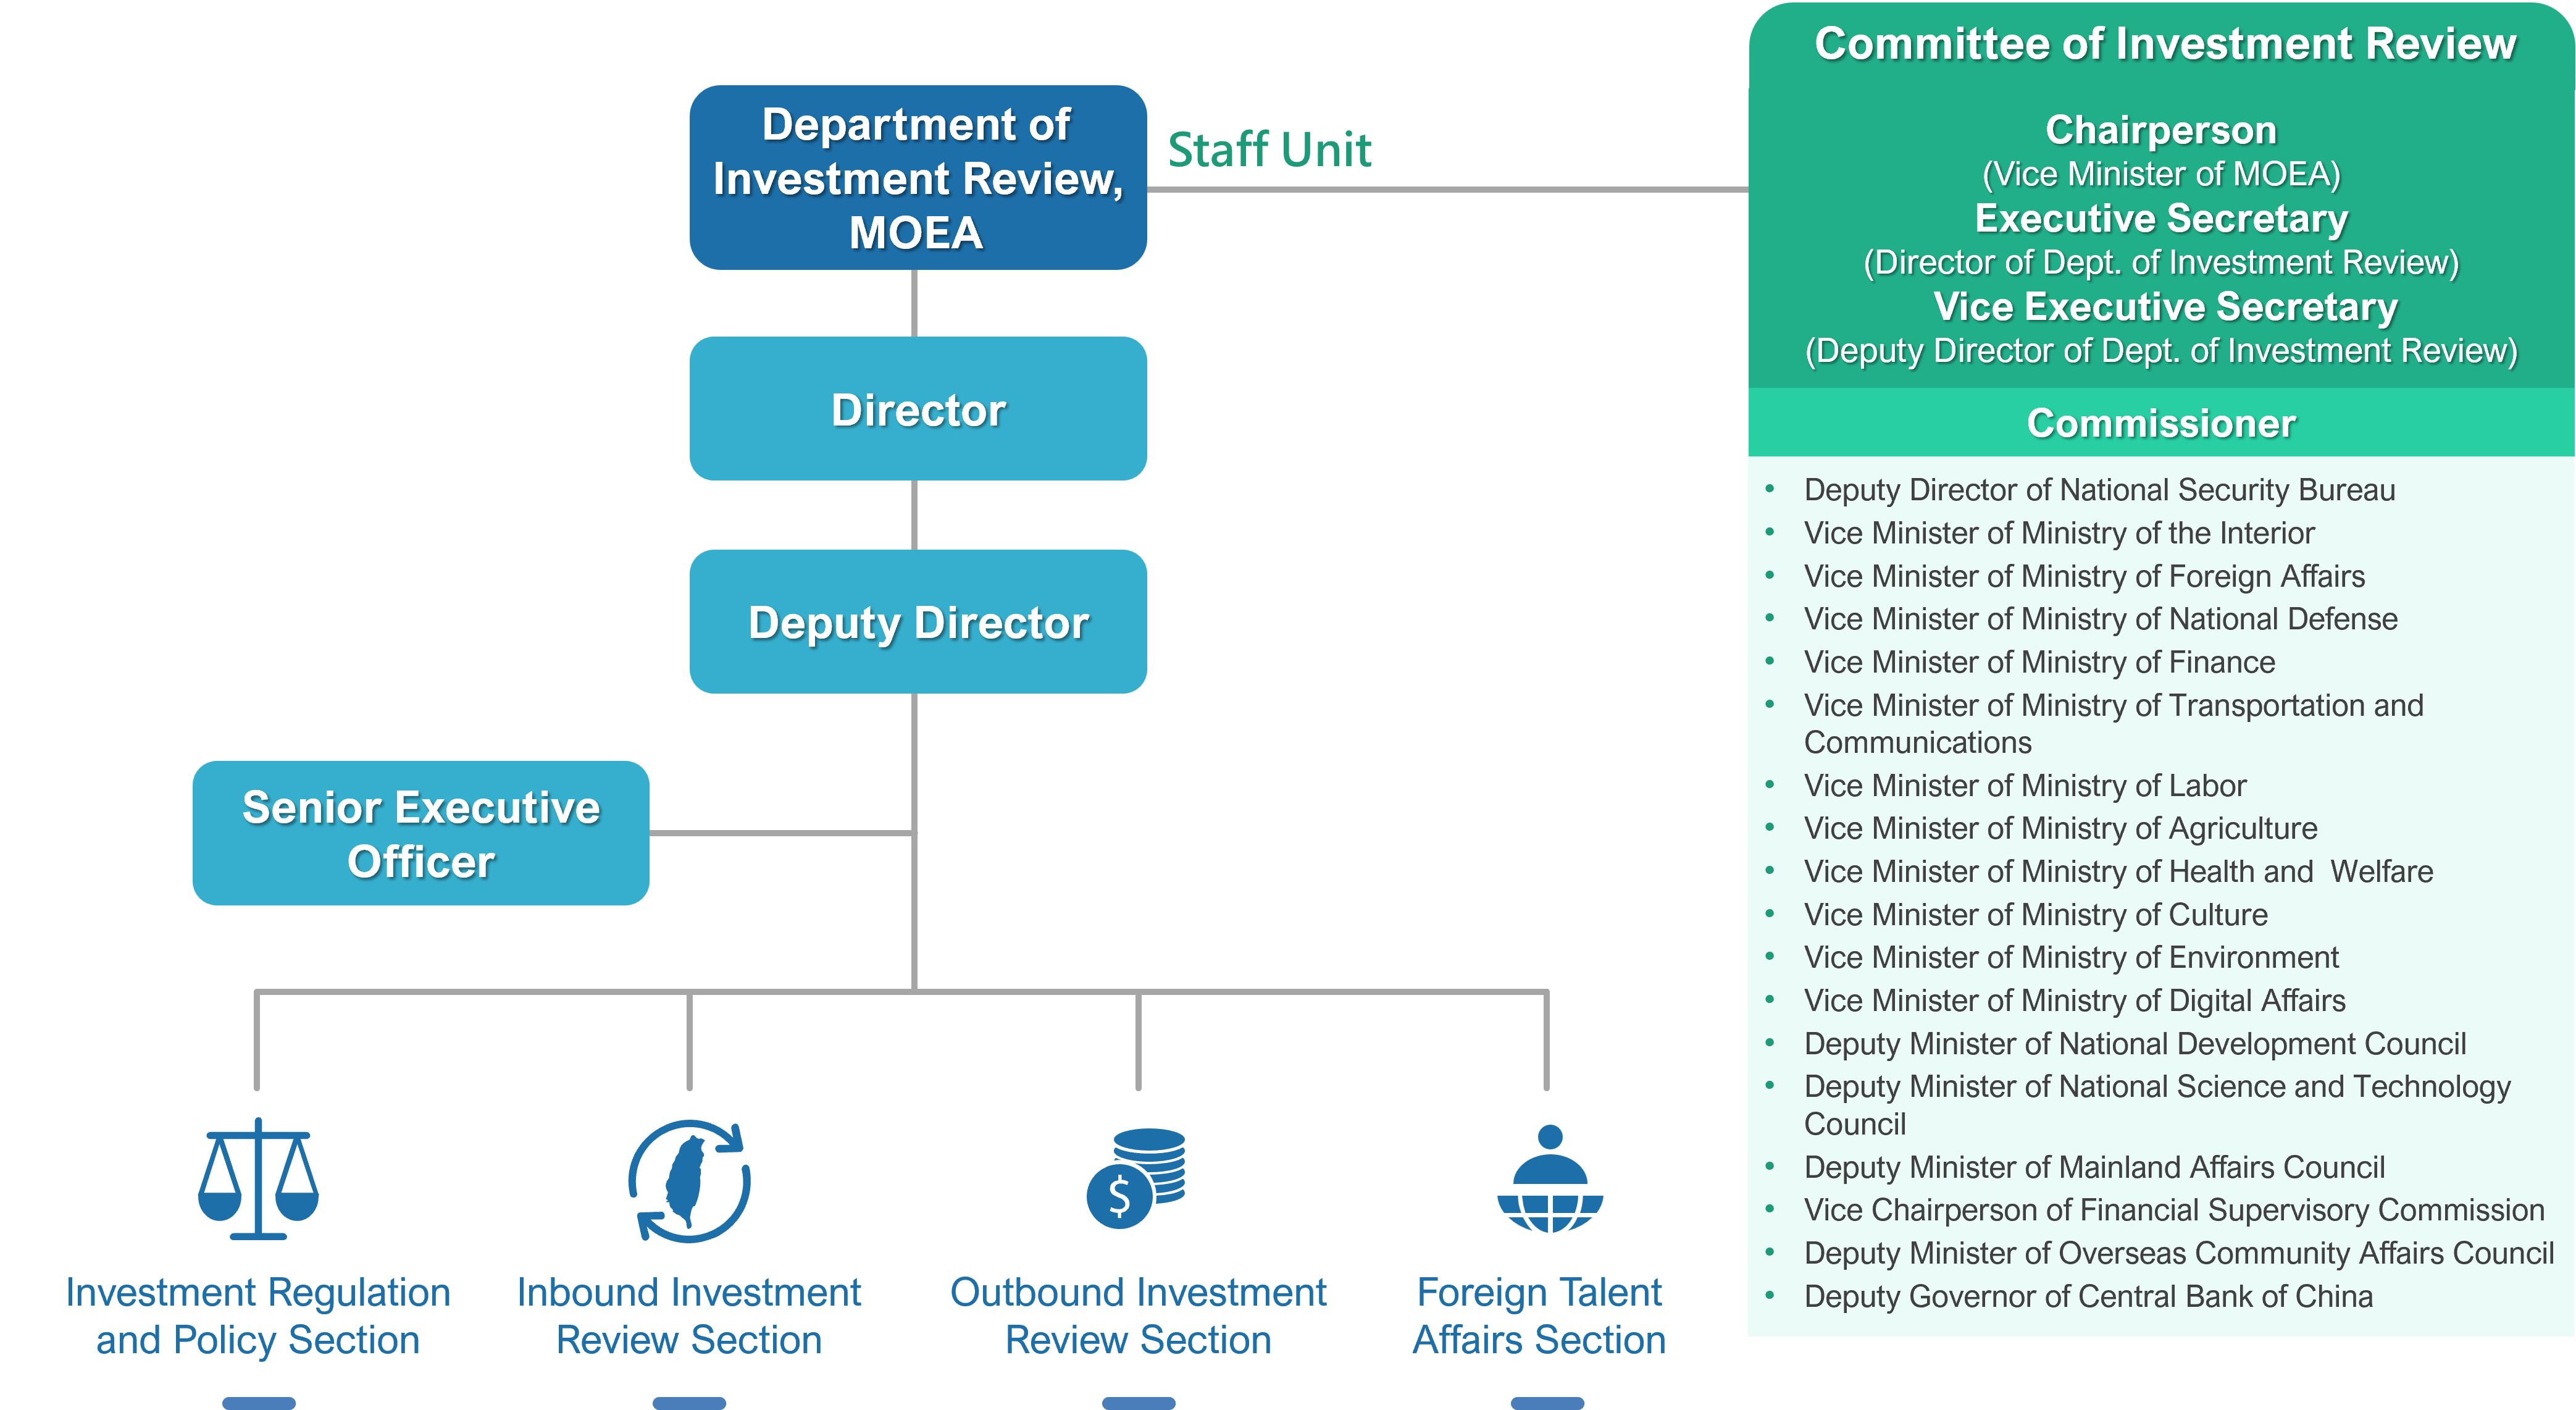 The organization structure of Department of Investment Review, MOEA includes Director, Deputy Director, Senior Executive Officer, Investment Regulation and Policy Section, Inbound Investment Review Section, Outbound Investment Review Section, Foreign Talents Affairs Section.